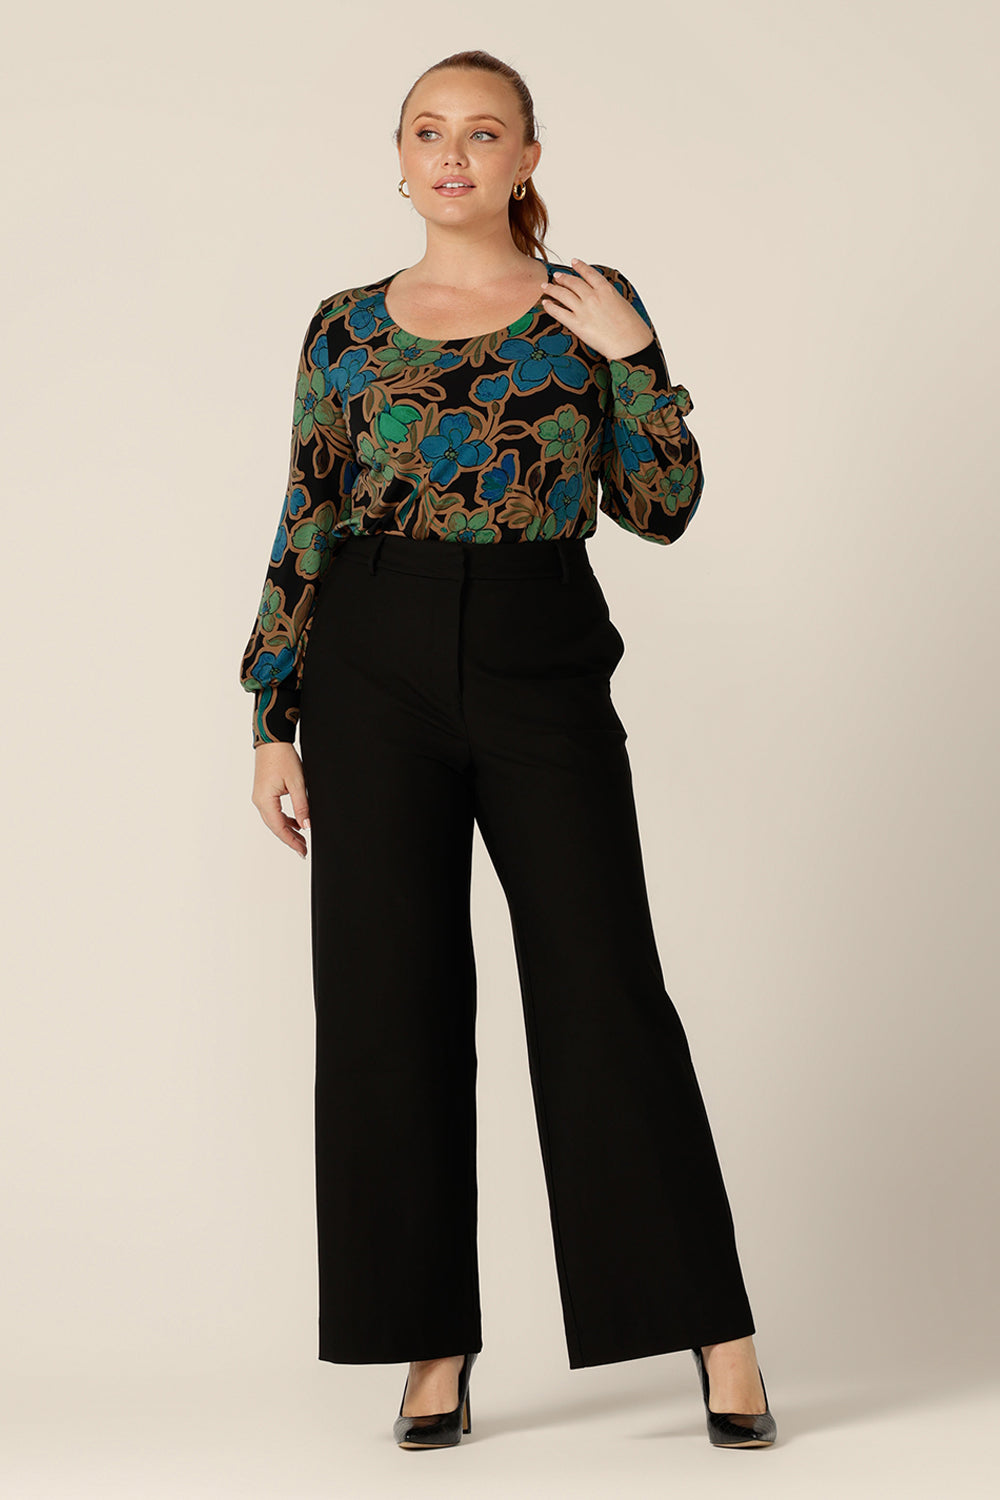 A size 12 woman wears a long sleeve top with scoop neck with tailored, wide leg, black pants. Both made in Australia by Australian and New Zealand women's clothing brand, L&F both pants and top are available to shop in sizes 8 to 24.